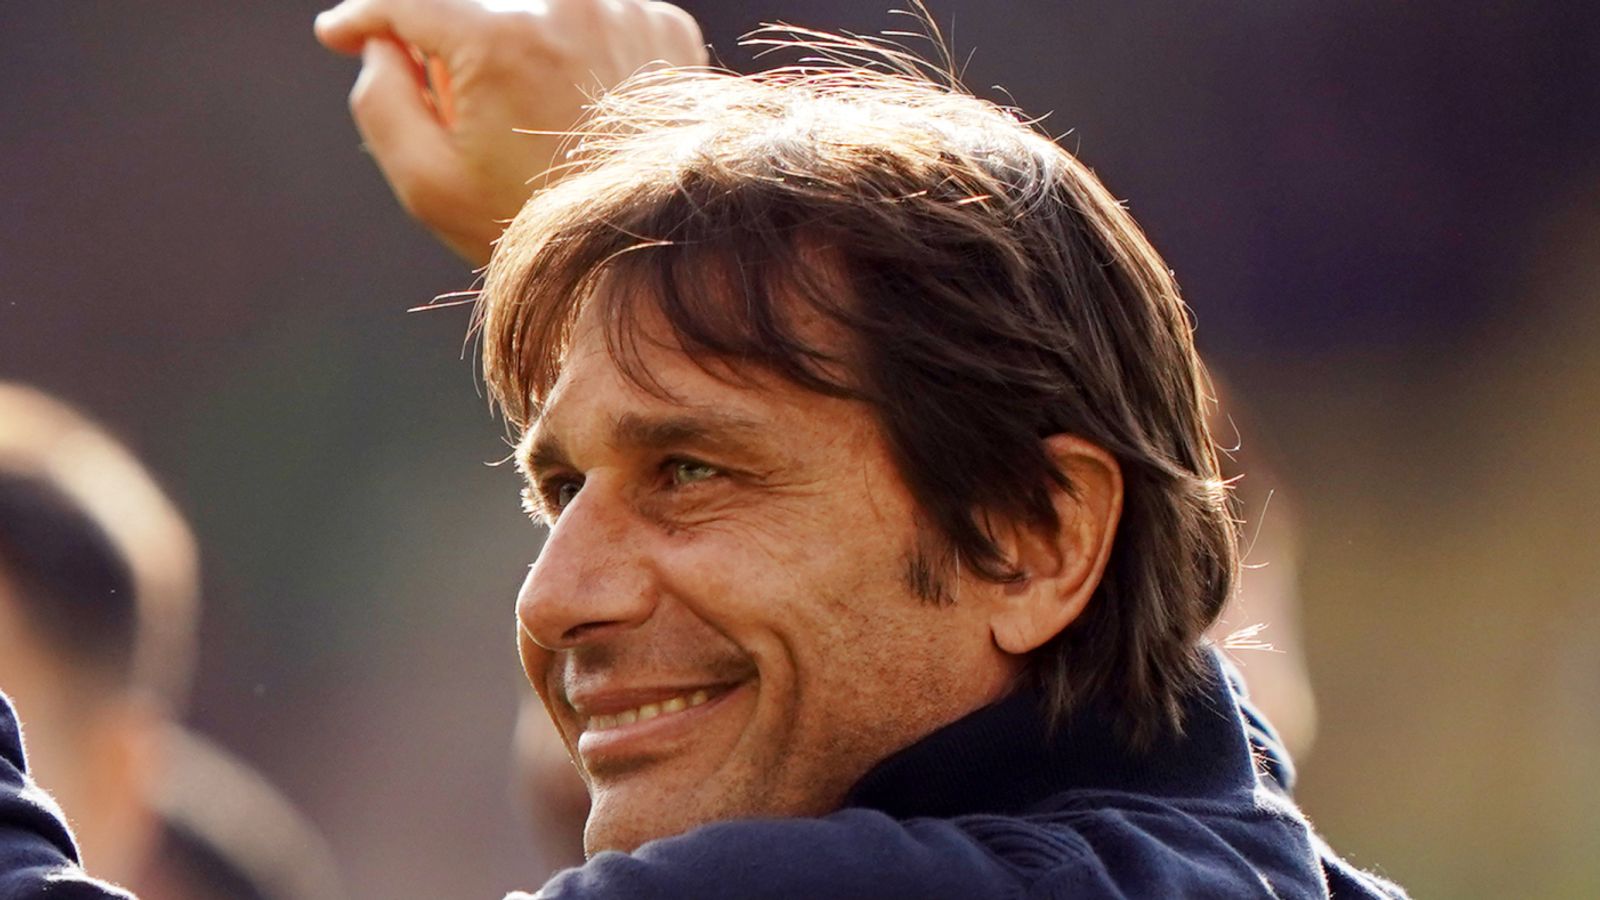 Antonio Conte: Spurs boss to speak with club in summer over his future after qualifying for Champions League